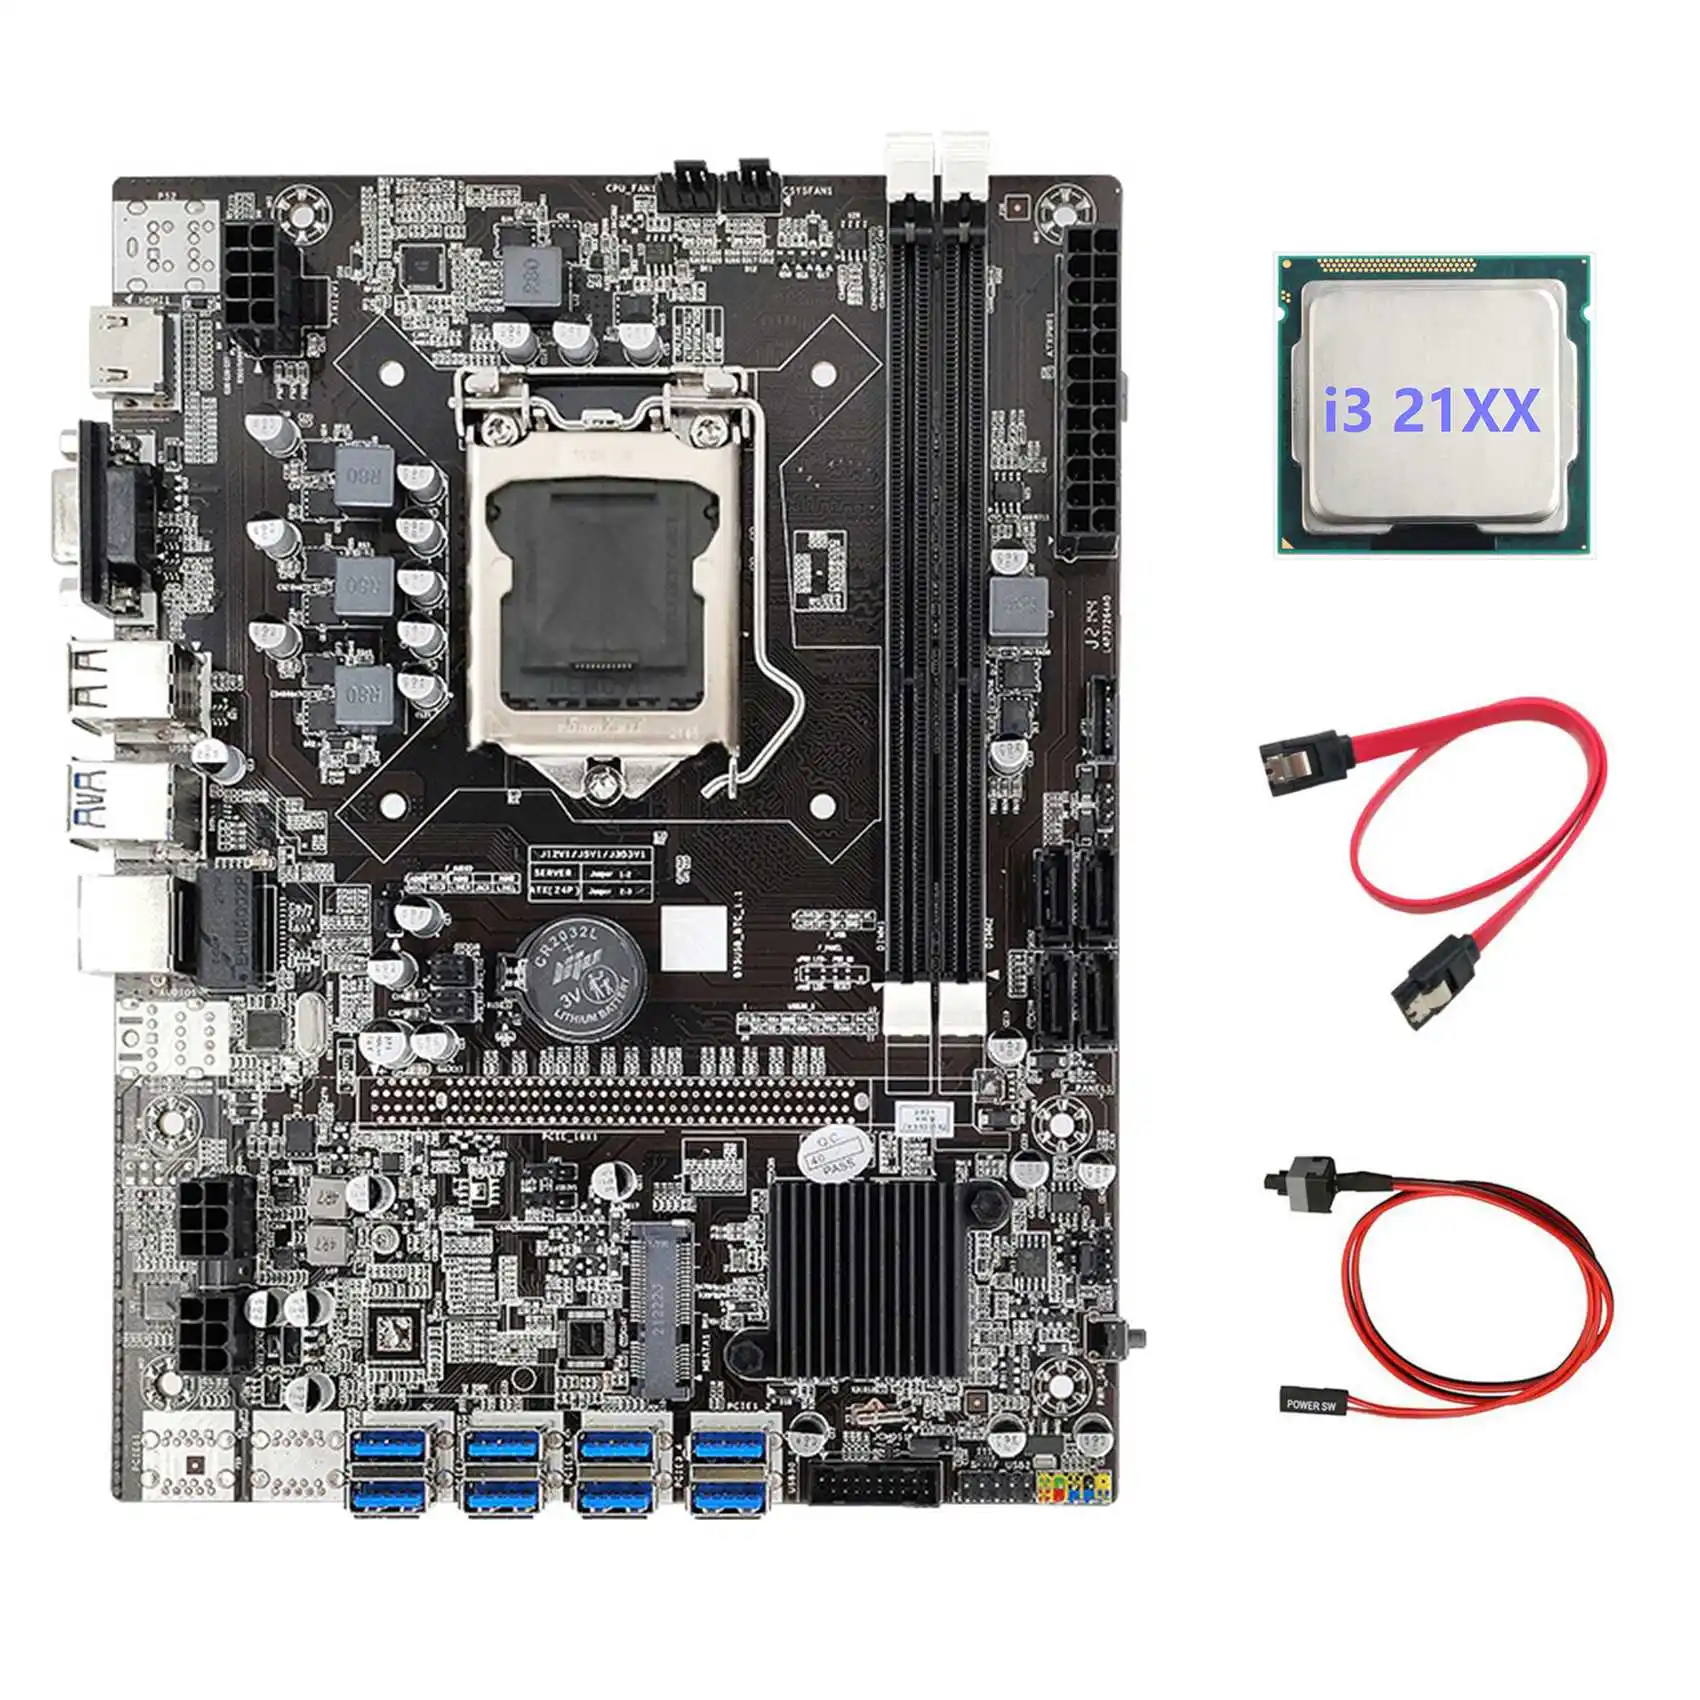 B75 ETH Mining Motherboard 8XPCIE USB Adapter+I3 21XX CPU+SATA Cable+Switch Cable LGA1155 B75 USB Miner Motherboard